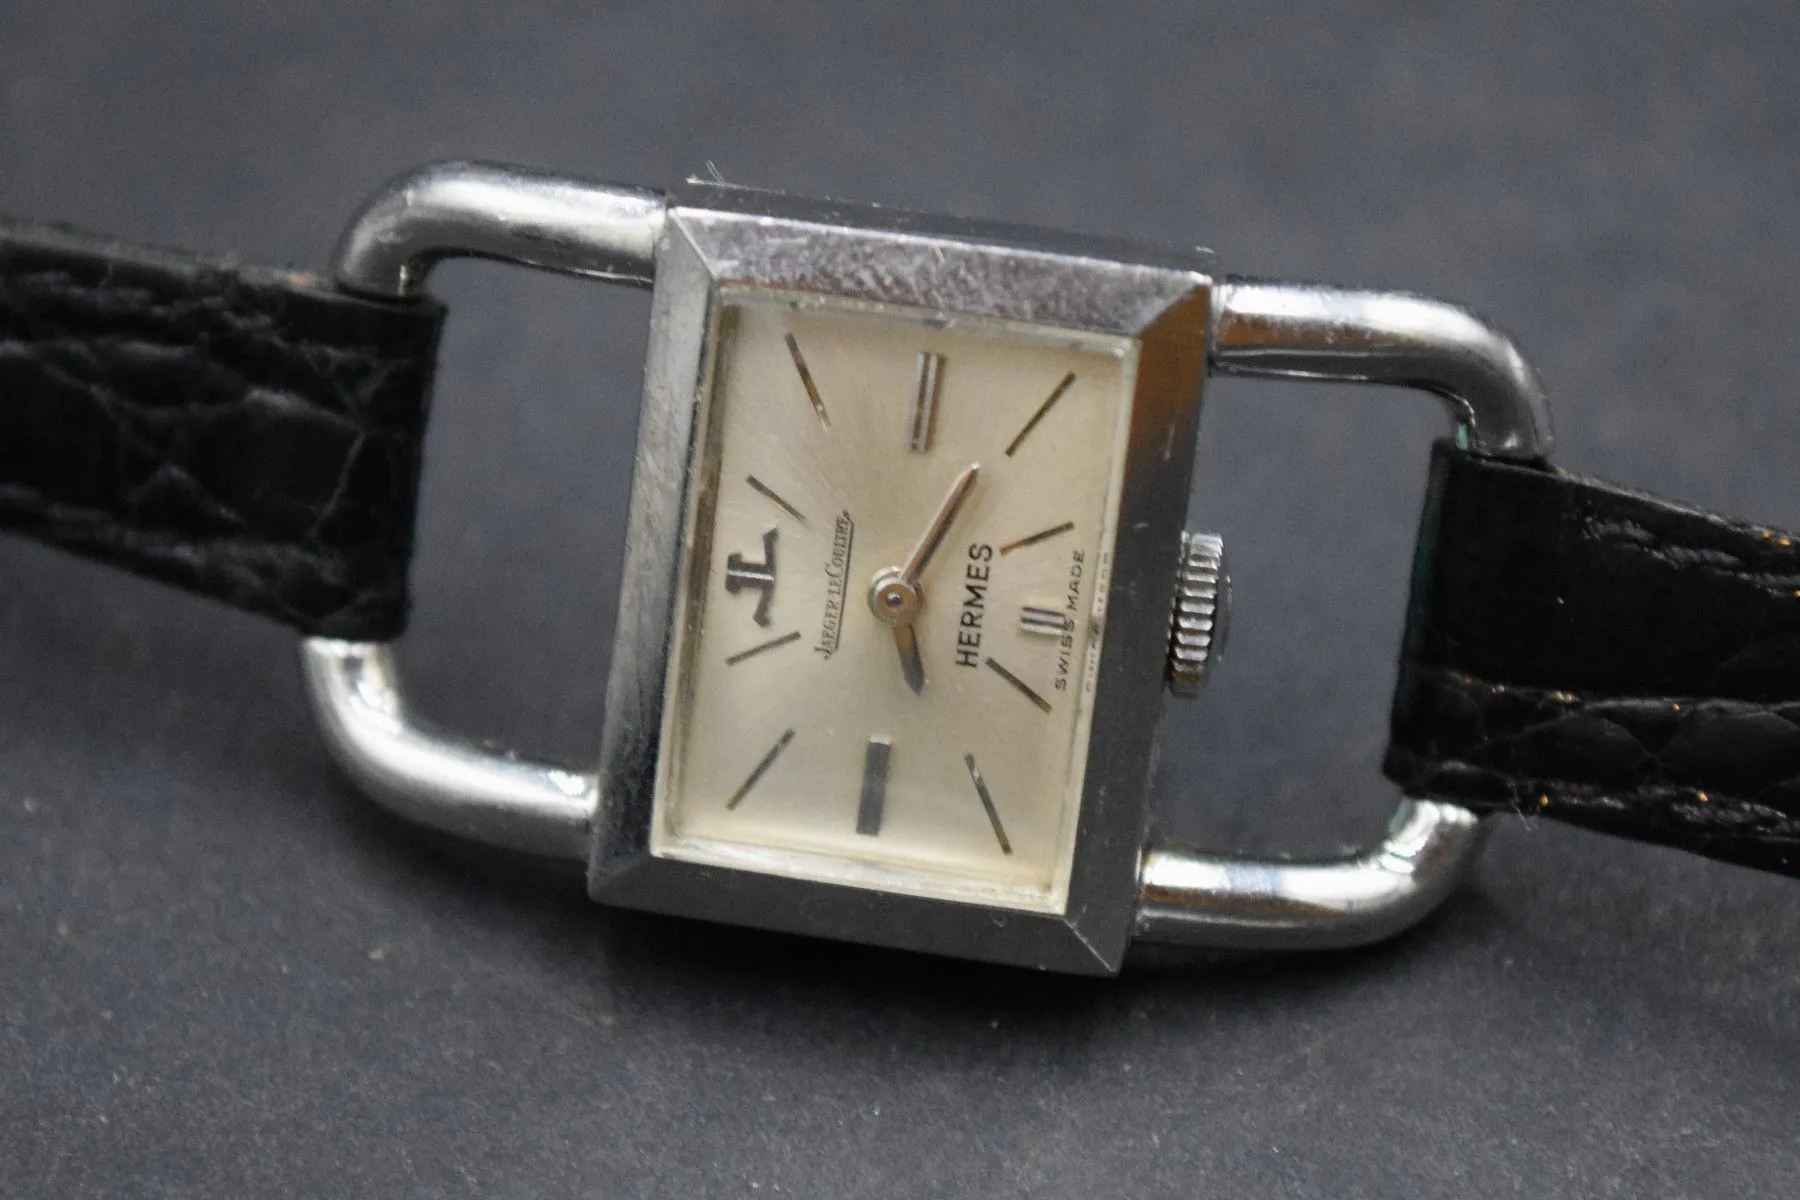 Jaeger-LeCoultre Étrier 1670.42 17mm Stainless steel Silver